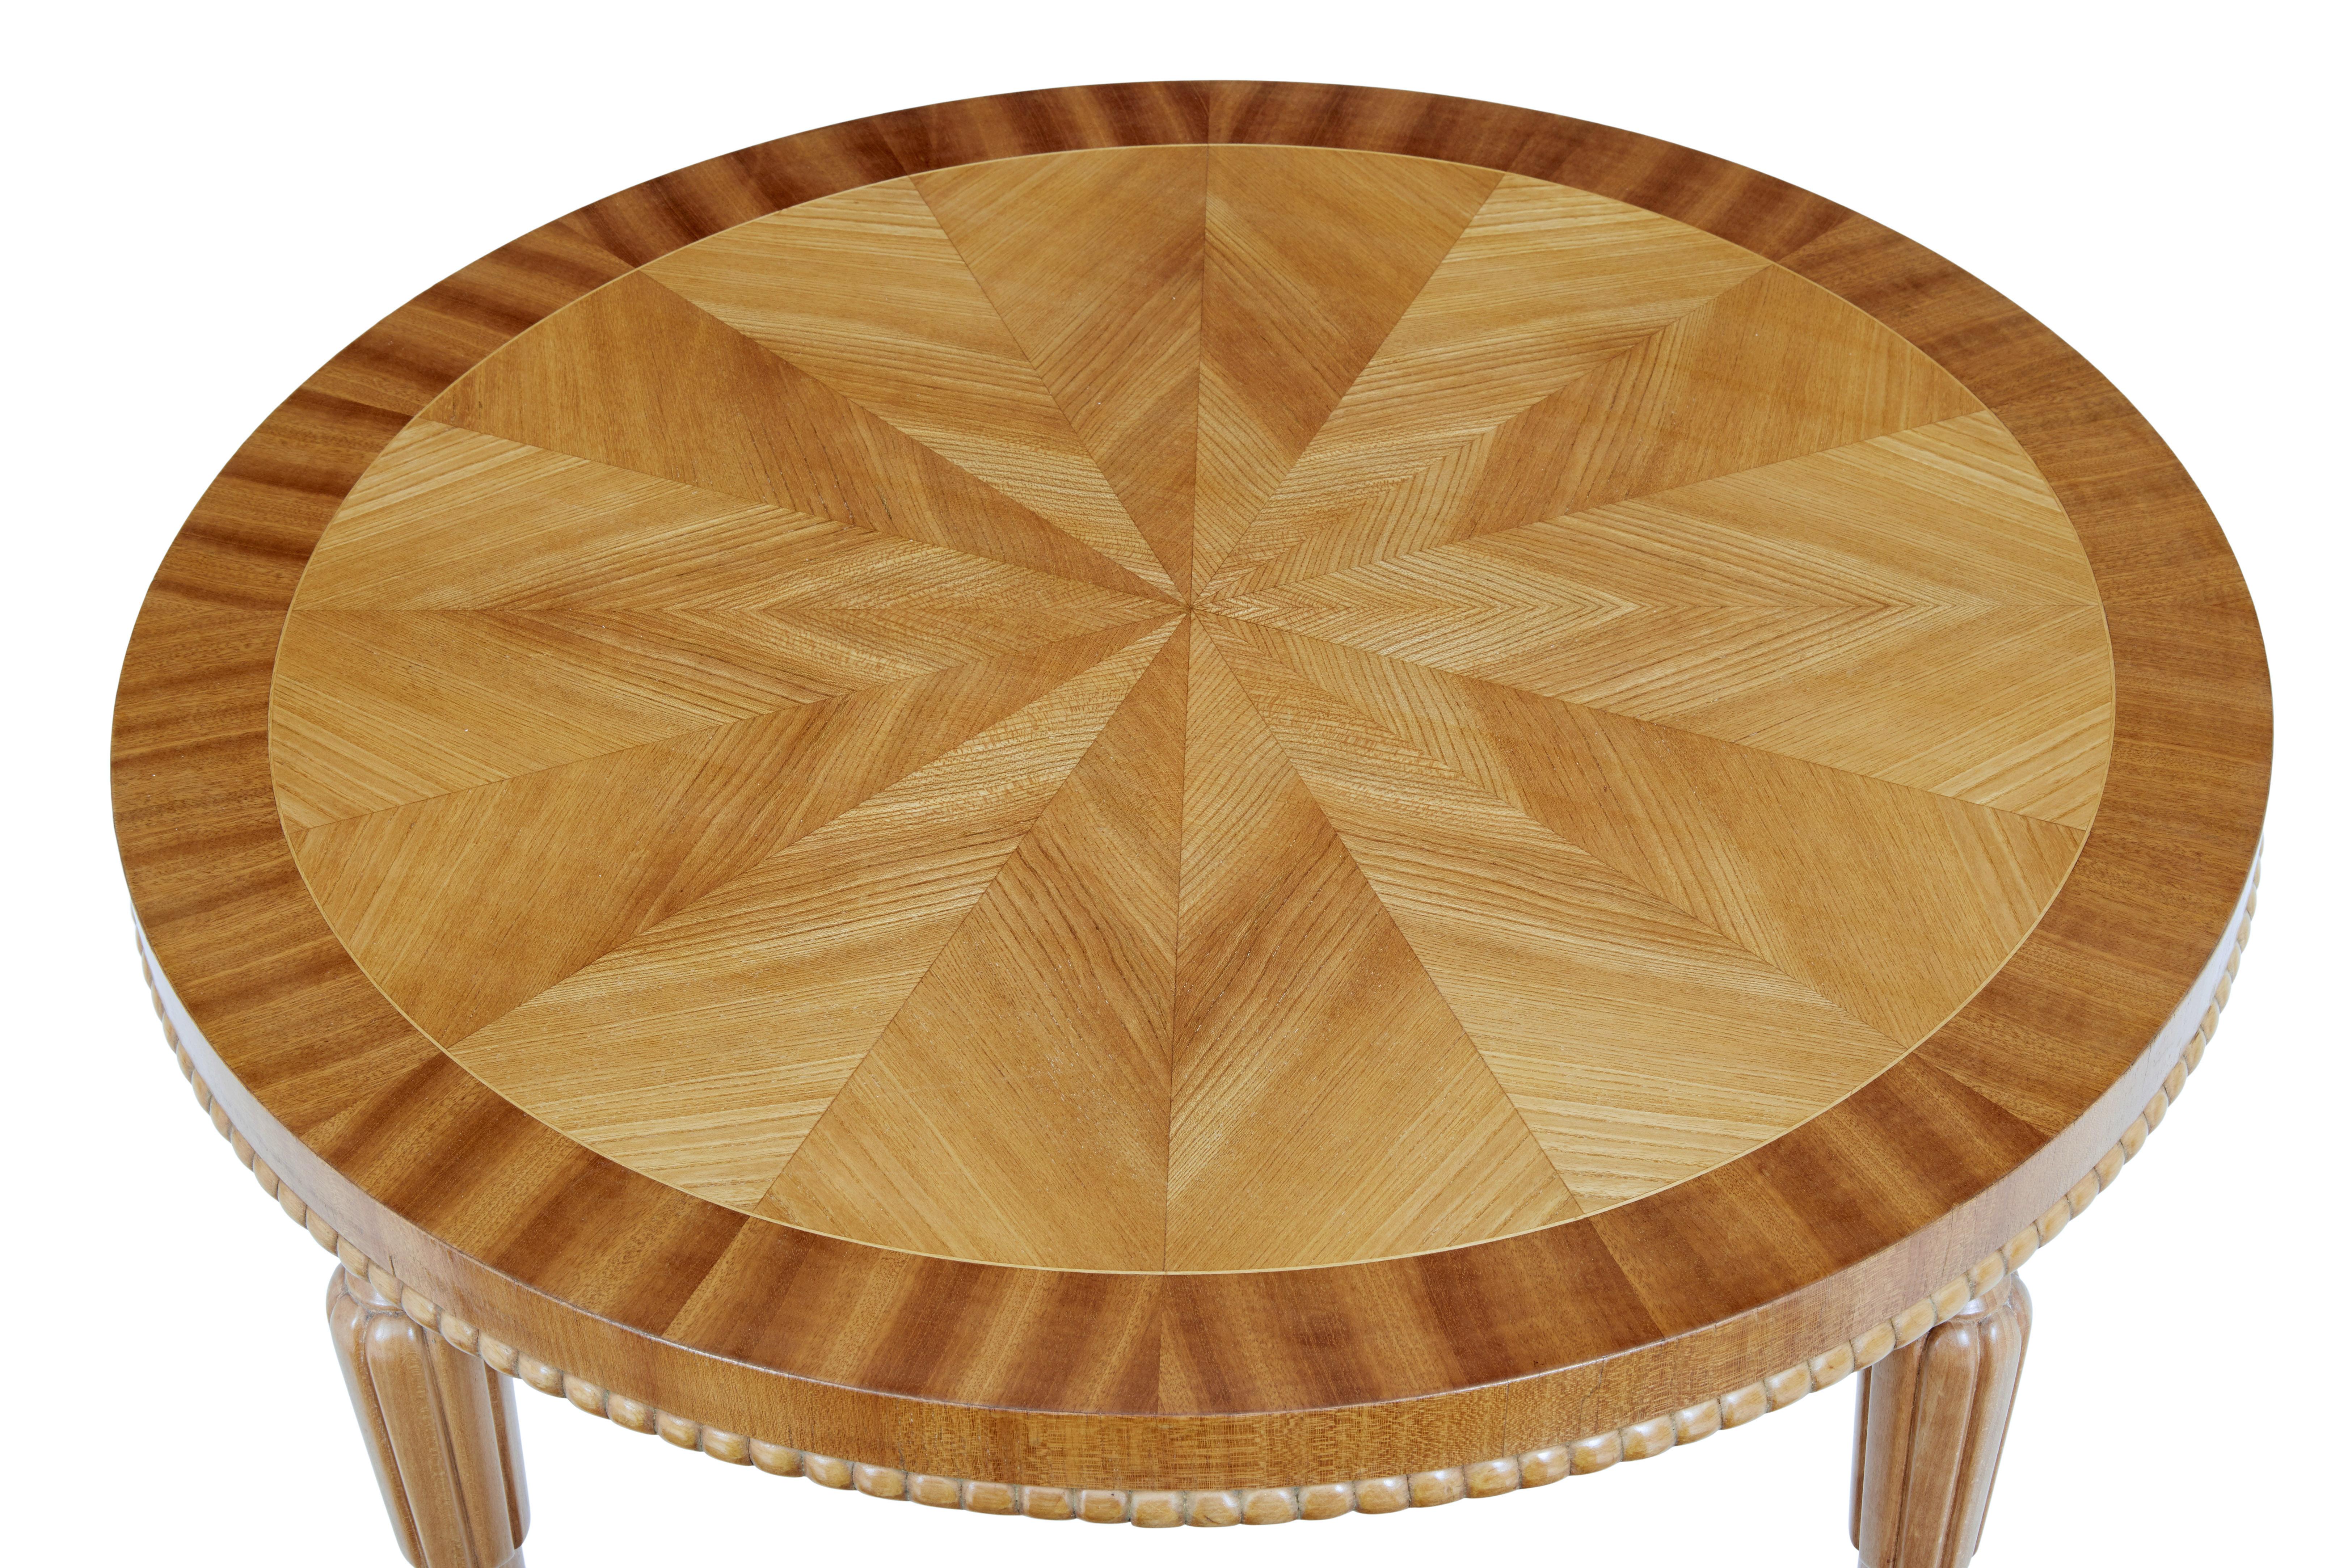 Scandinavian mid 20th century elm round coffee table circa 1950.

Round top with segmented elm veneer centre and stringing in between an outer mahogany border. Beaded detail below the apron. Standing on tapered legs with fluted detail.

Very